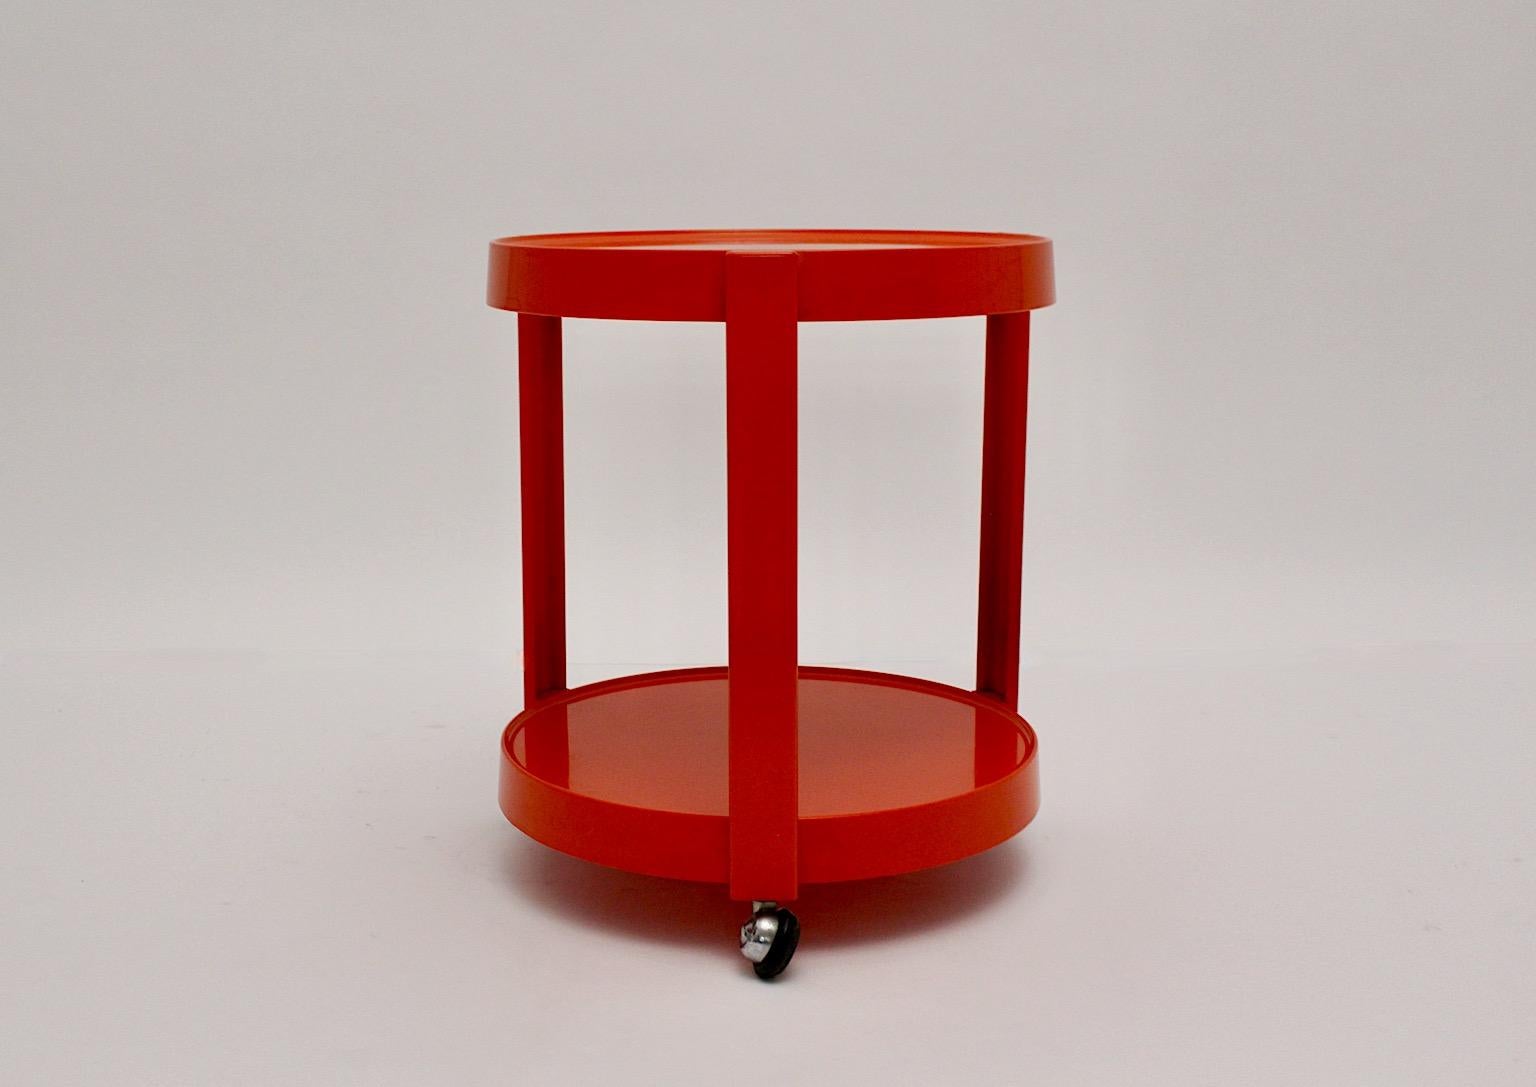 Space Age vintage red orange plastic bar cart or serving table or side table
1970s Germany.
A wonderful bar cart or serving table from plastic circular like with three connections between two tiers features wheels for a good mobility.
The boldly